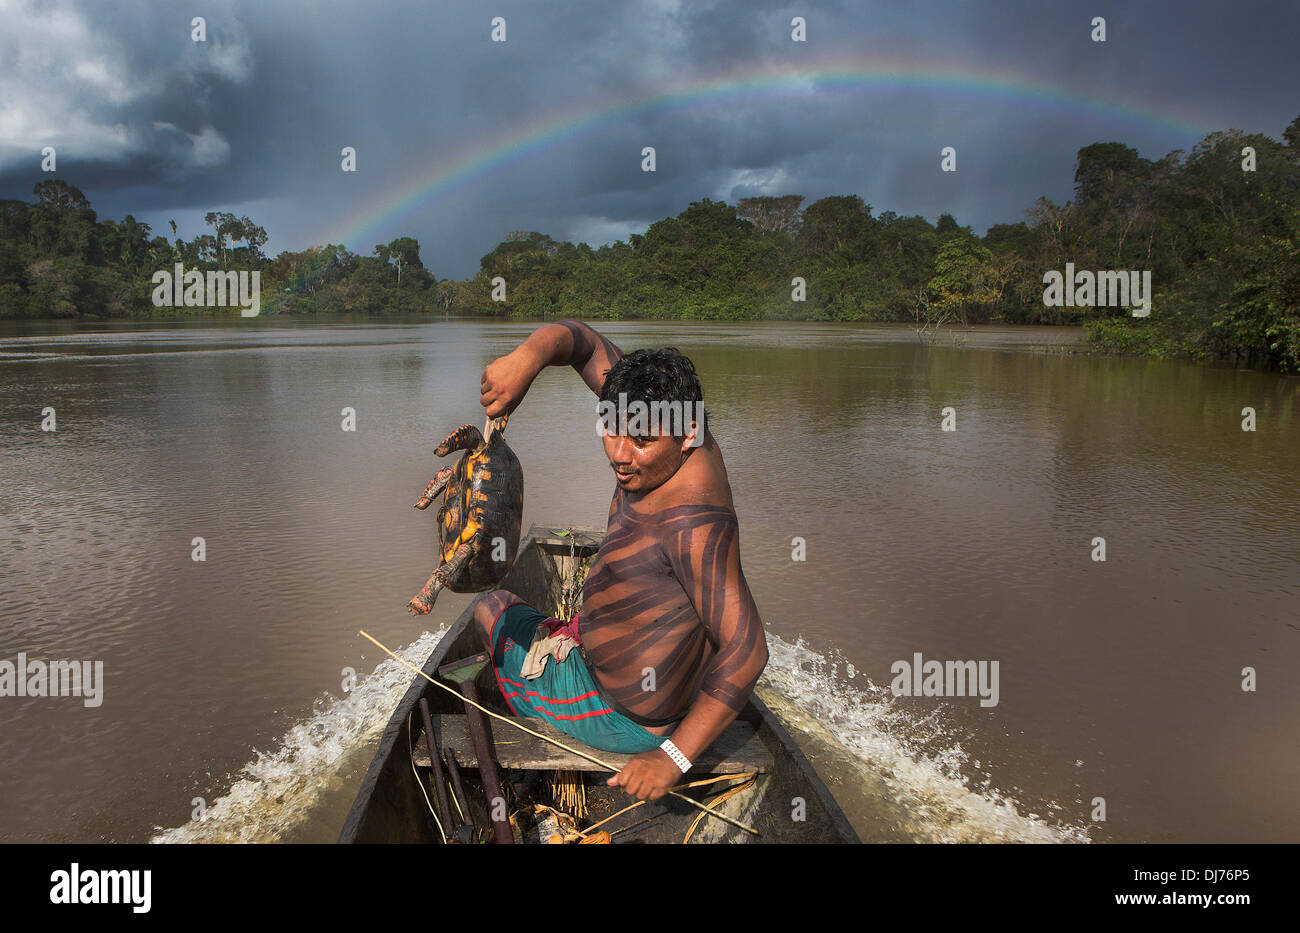 Apr 27, 2013 - Poti-Kro, Para, Brazil - Kroire, a warrior of Poti-Kro, returns from a successful hunting trip with a jabuti, or land turtle. Villagers usually take boats to different parts of the jungle to avoid overhunting any one area. Xikrin people live on the Bacaja, a tributary of the Xingu River, where construction of the Belo Monte Dam is reaching peak construction. Some scientists warn that the water level of the Bacaja will decrease precipitously due to the dam. (Credit Image: © Taylor Weidman/ZUMA Wire/ZUMAPRESS.com) Stock Photo